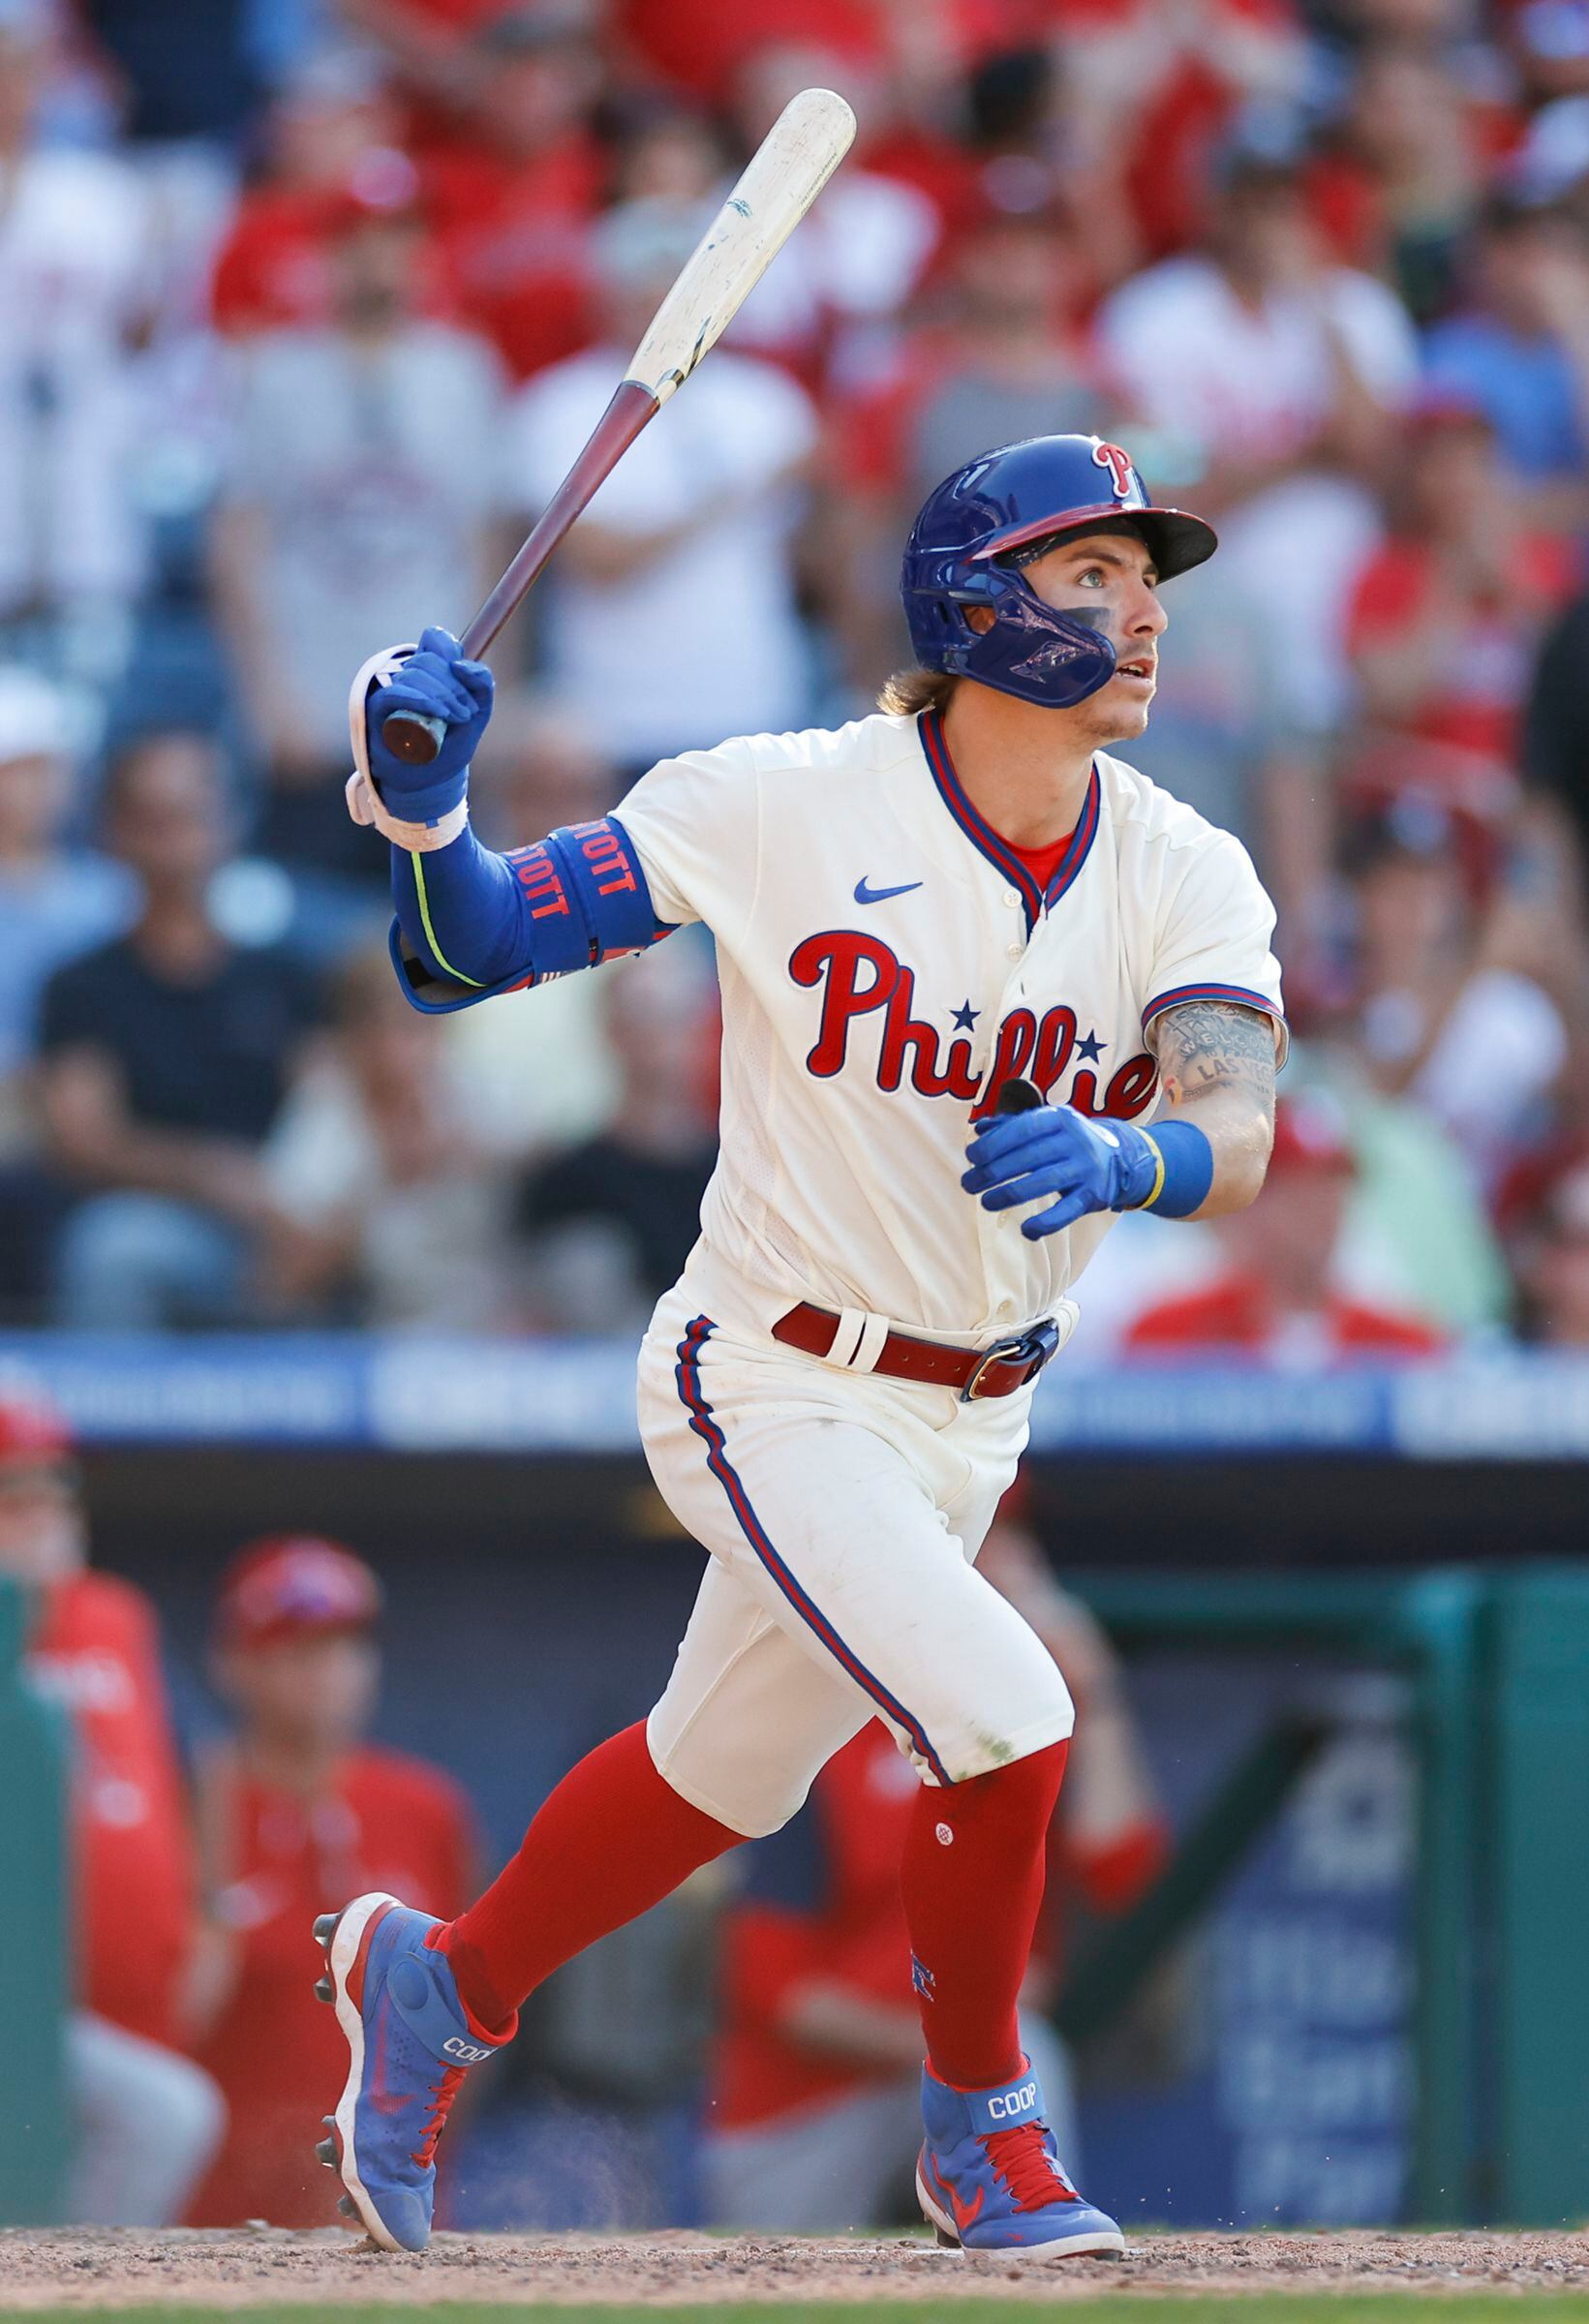 Stott, Harper finish off sweep of struggling Angels in thrilling walk-off   Phillies Nation - Your source for Philadelphia Phillies news, opinion,  history, rumors, events, and other fun stuff.